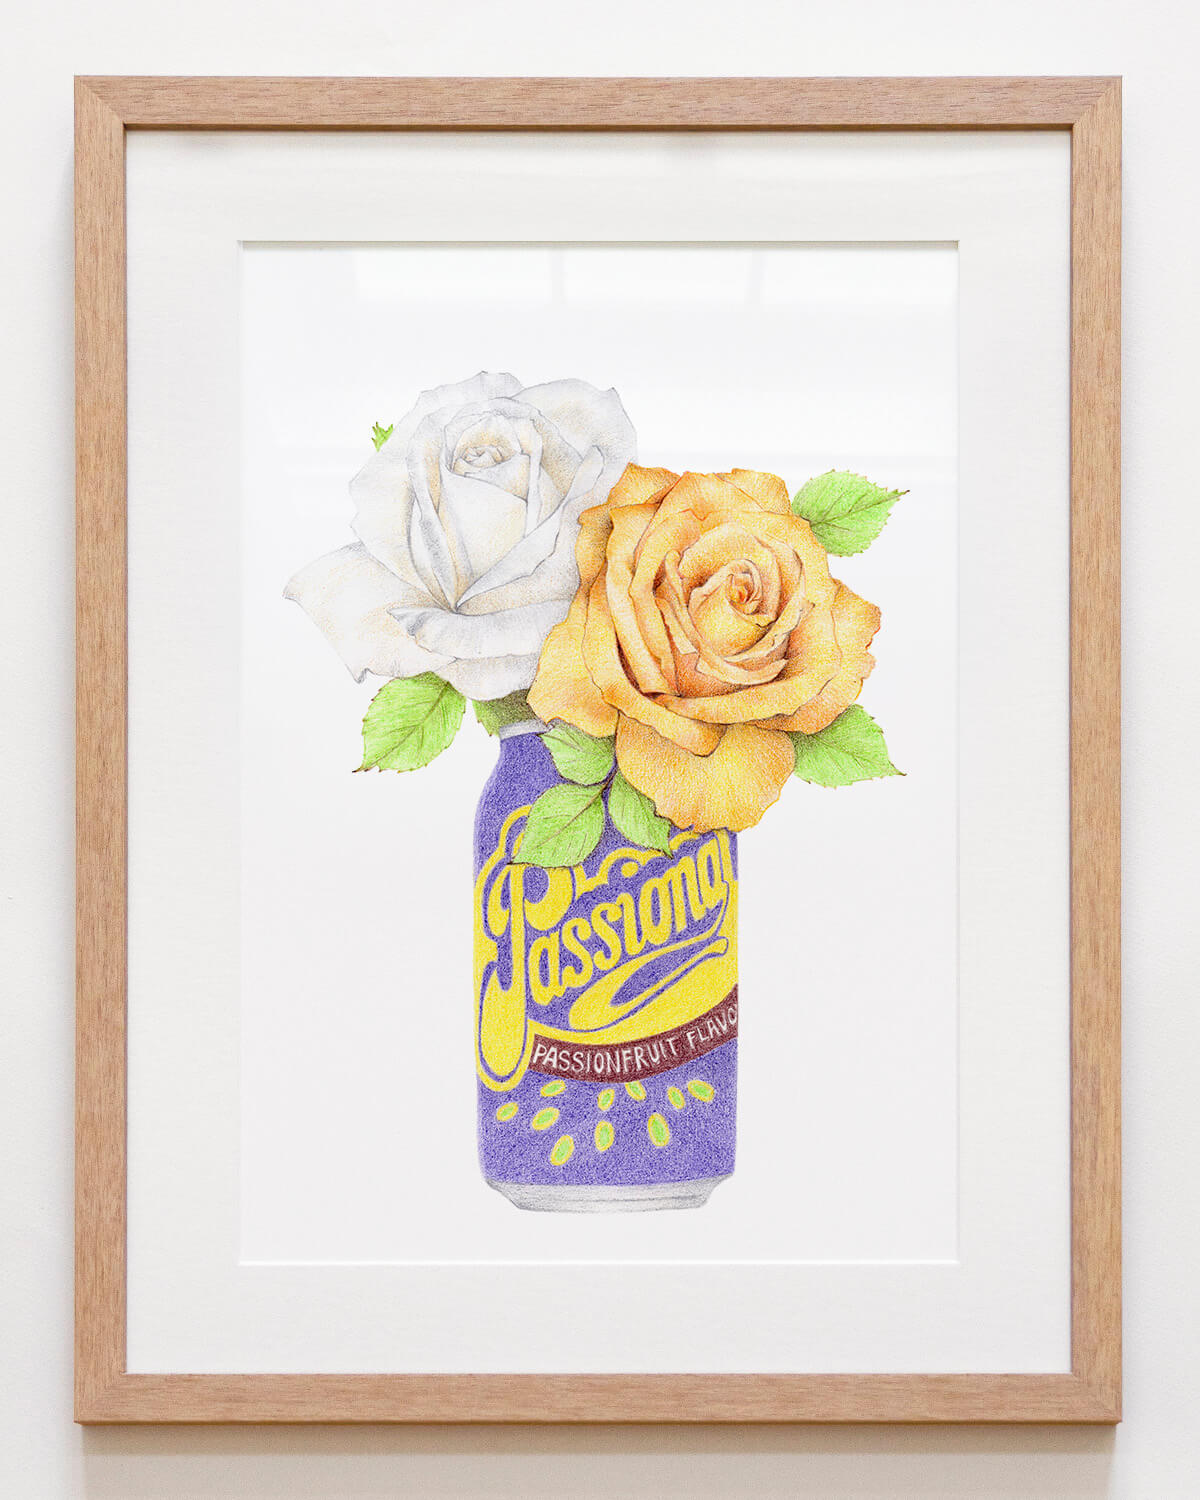 Australian art print featuring roses housed in a Passiona can